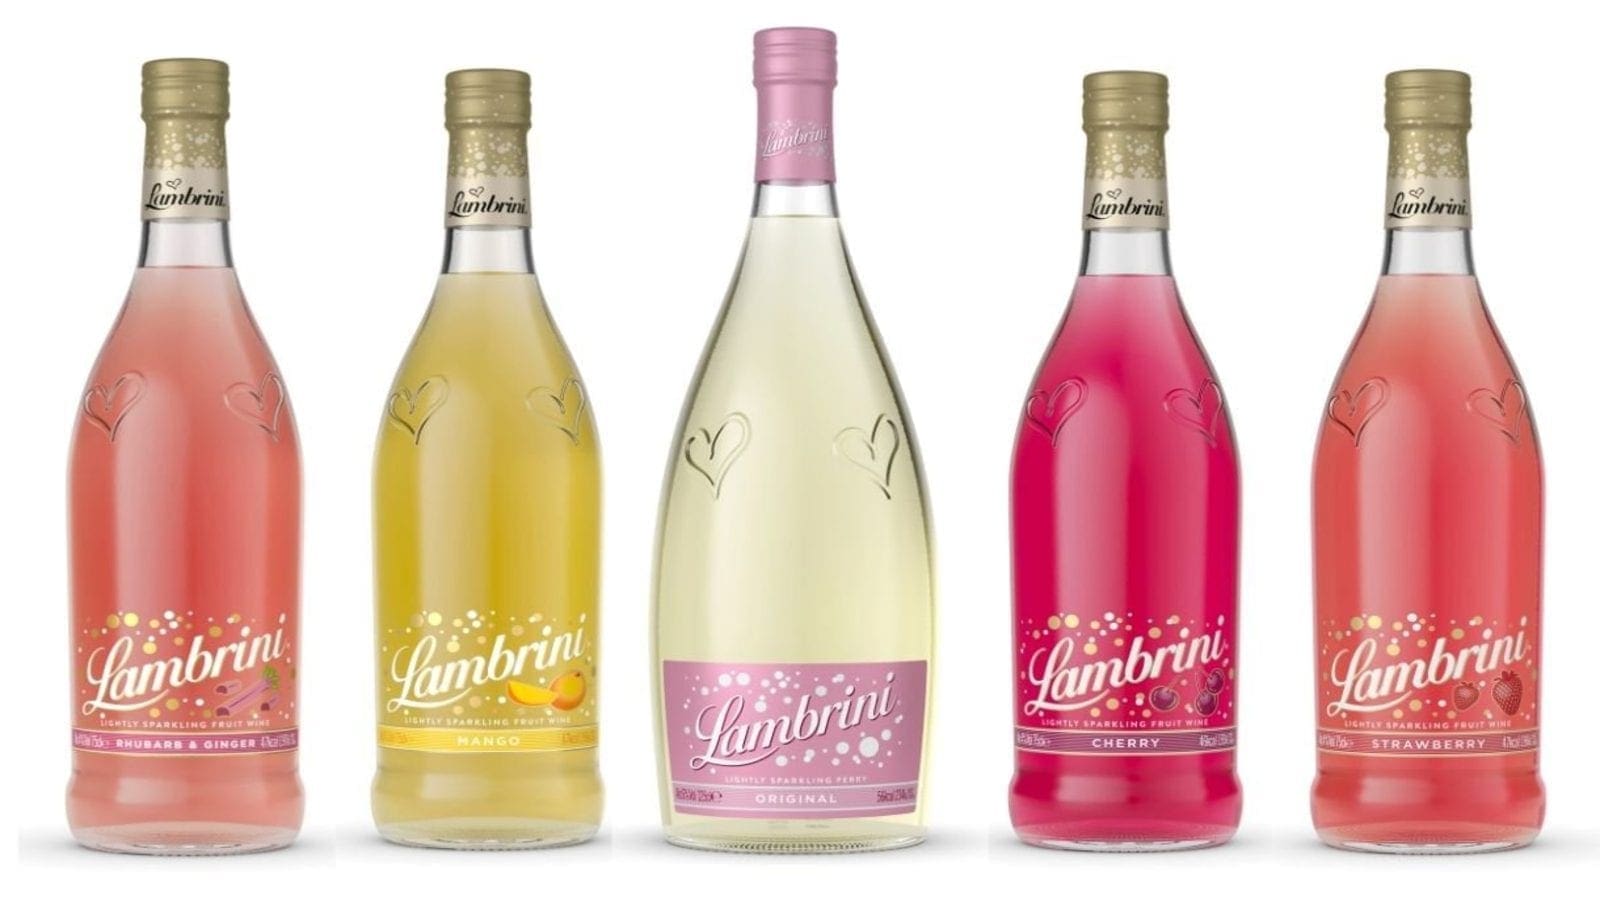 Accolade Wine bolsters UK alcoholic beverage portfolio with acquisition of Lambrini perry brand